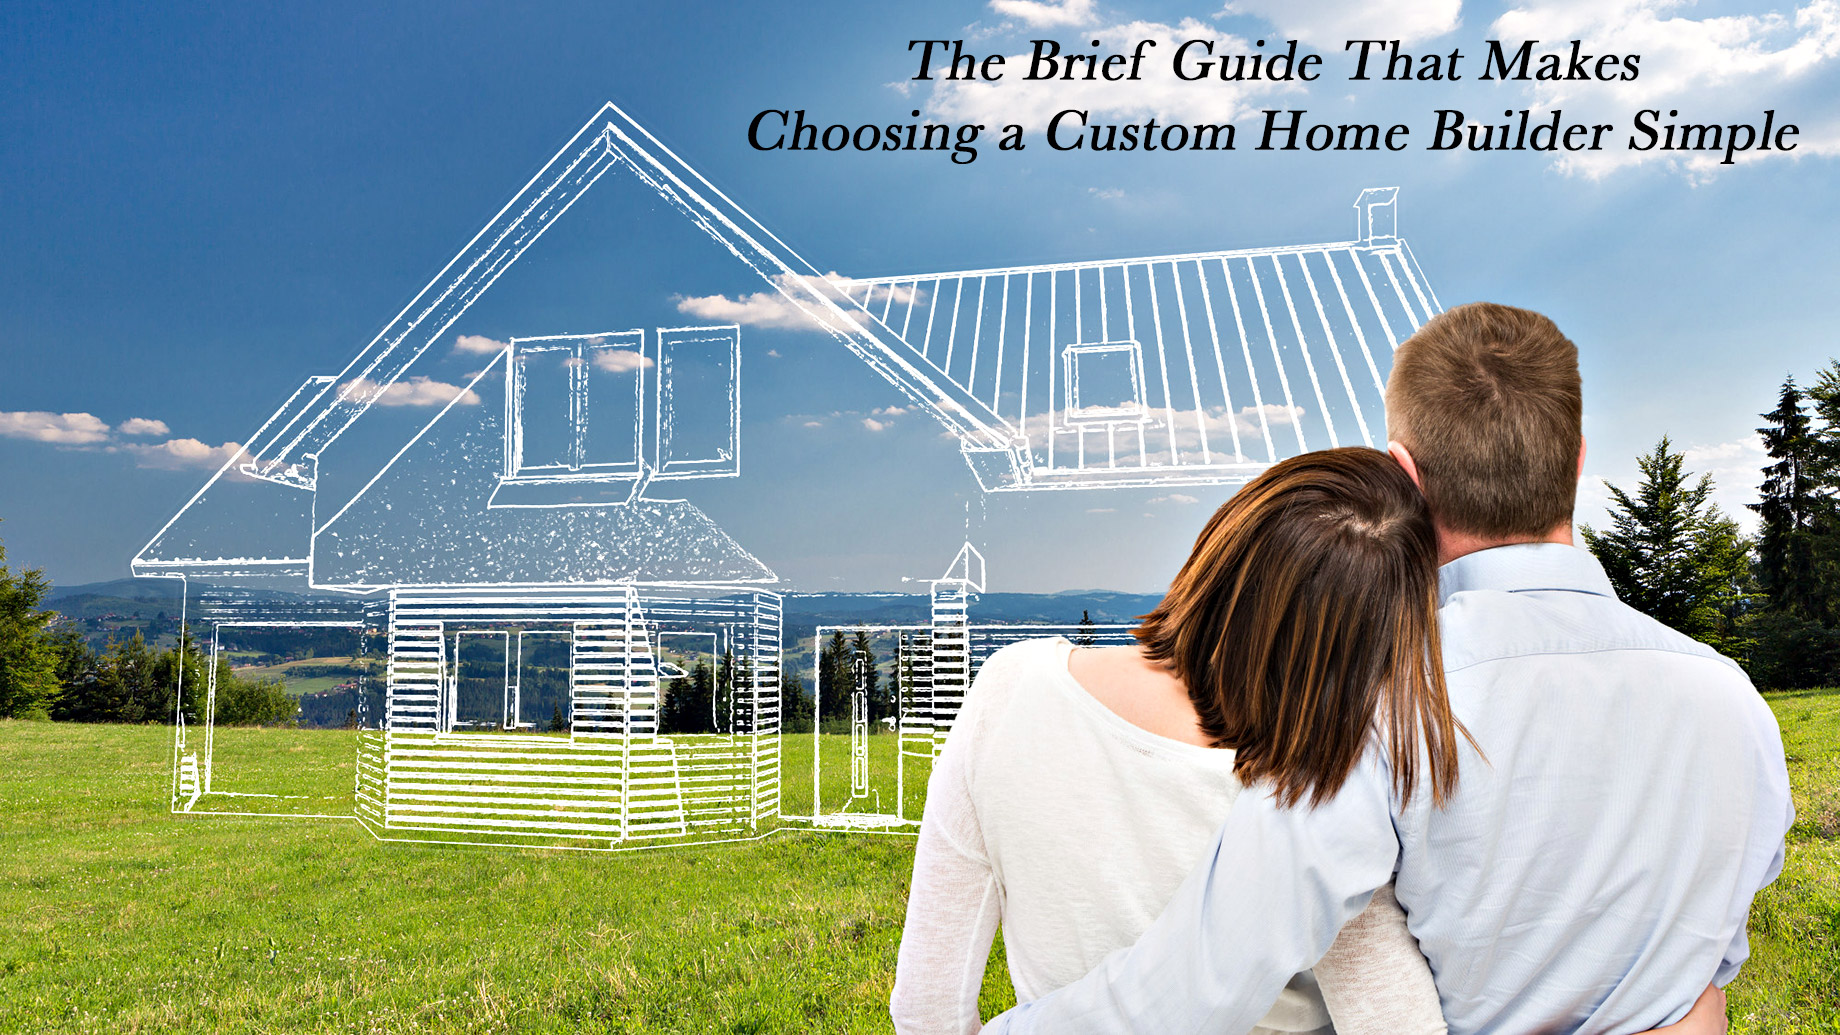 The Brief Guide That Makes Choosing a Custom Home Builder Simple